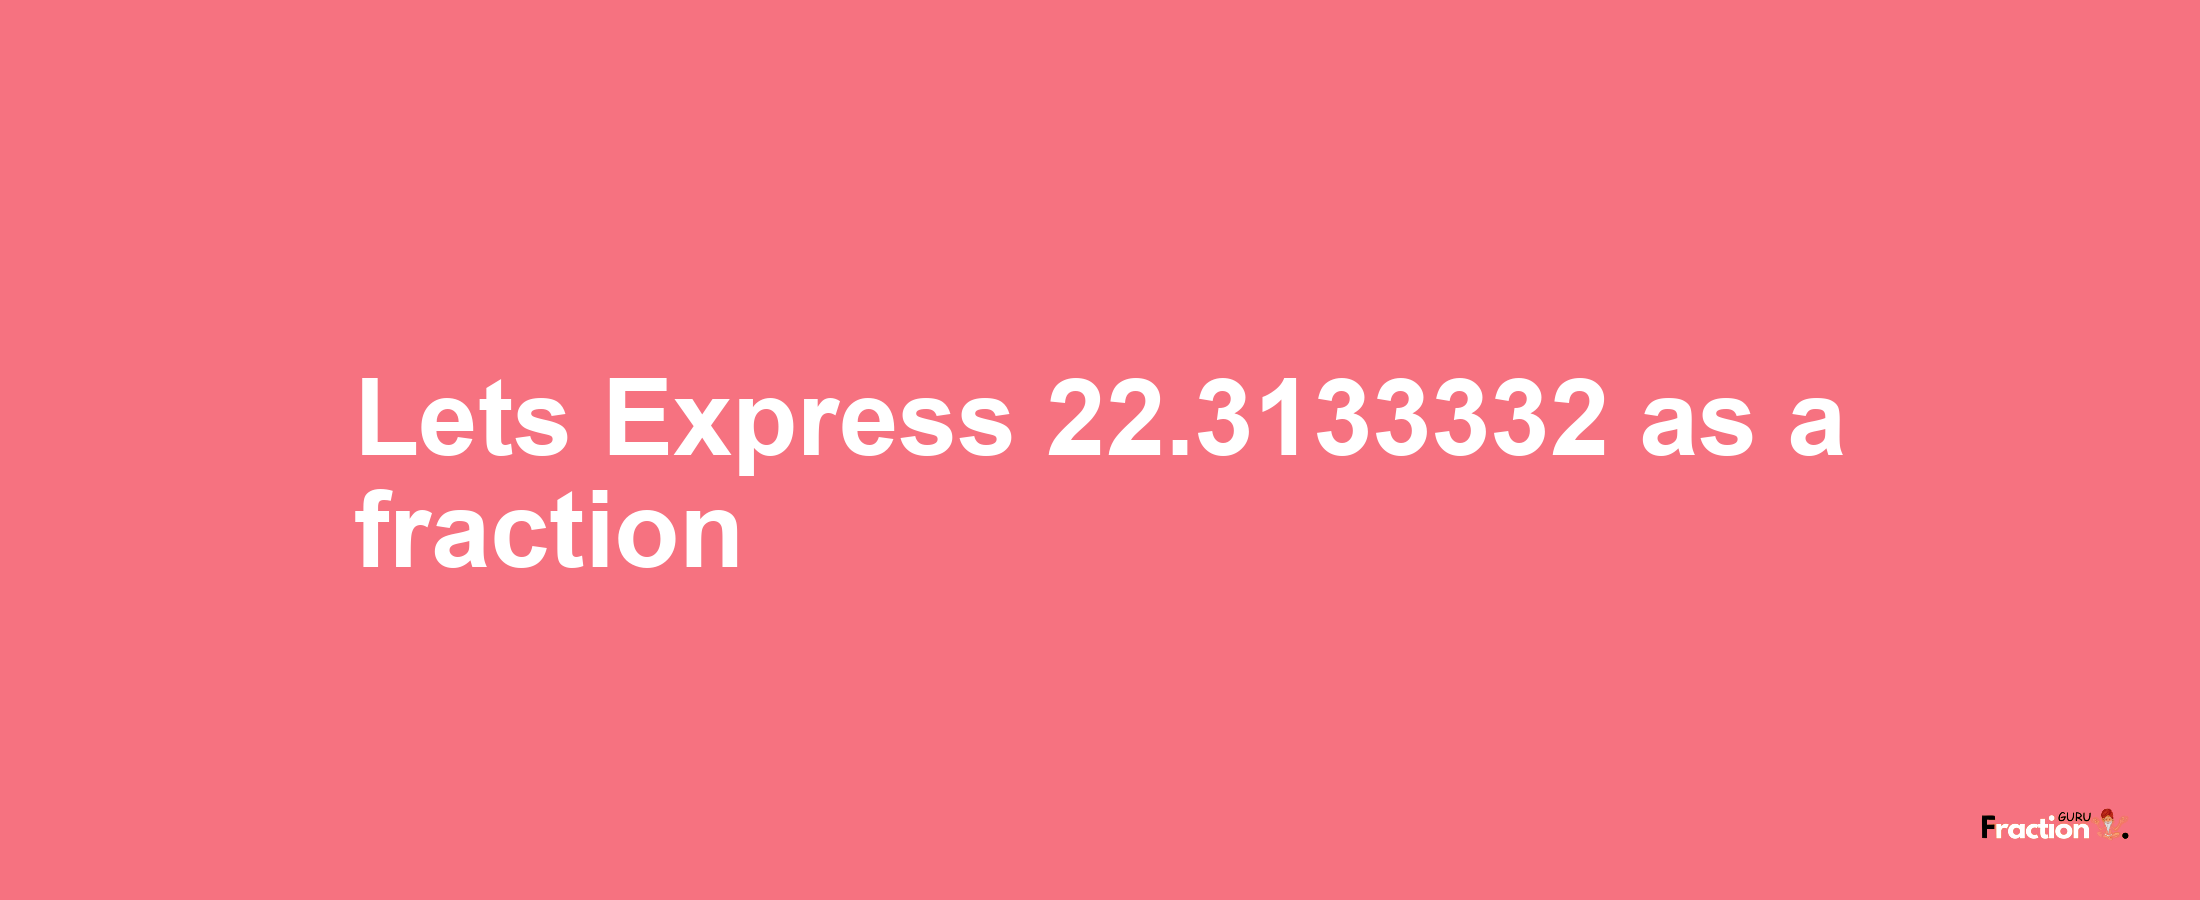 Lets Express 22.3133332 as afraction